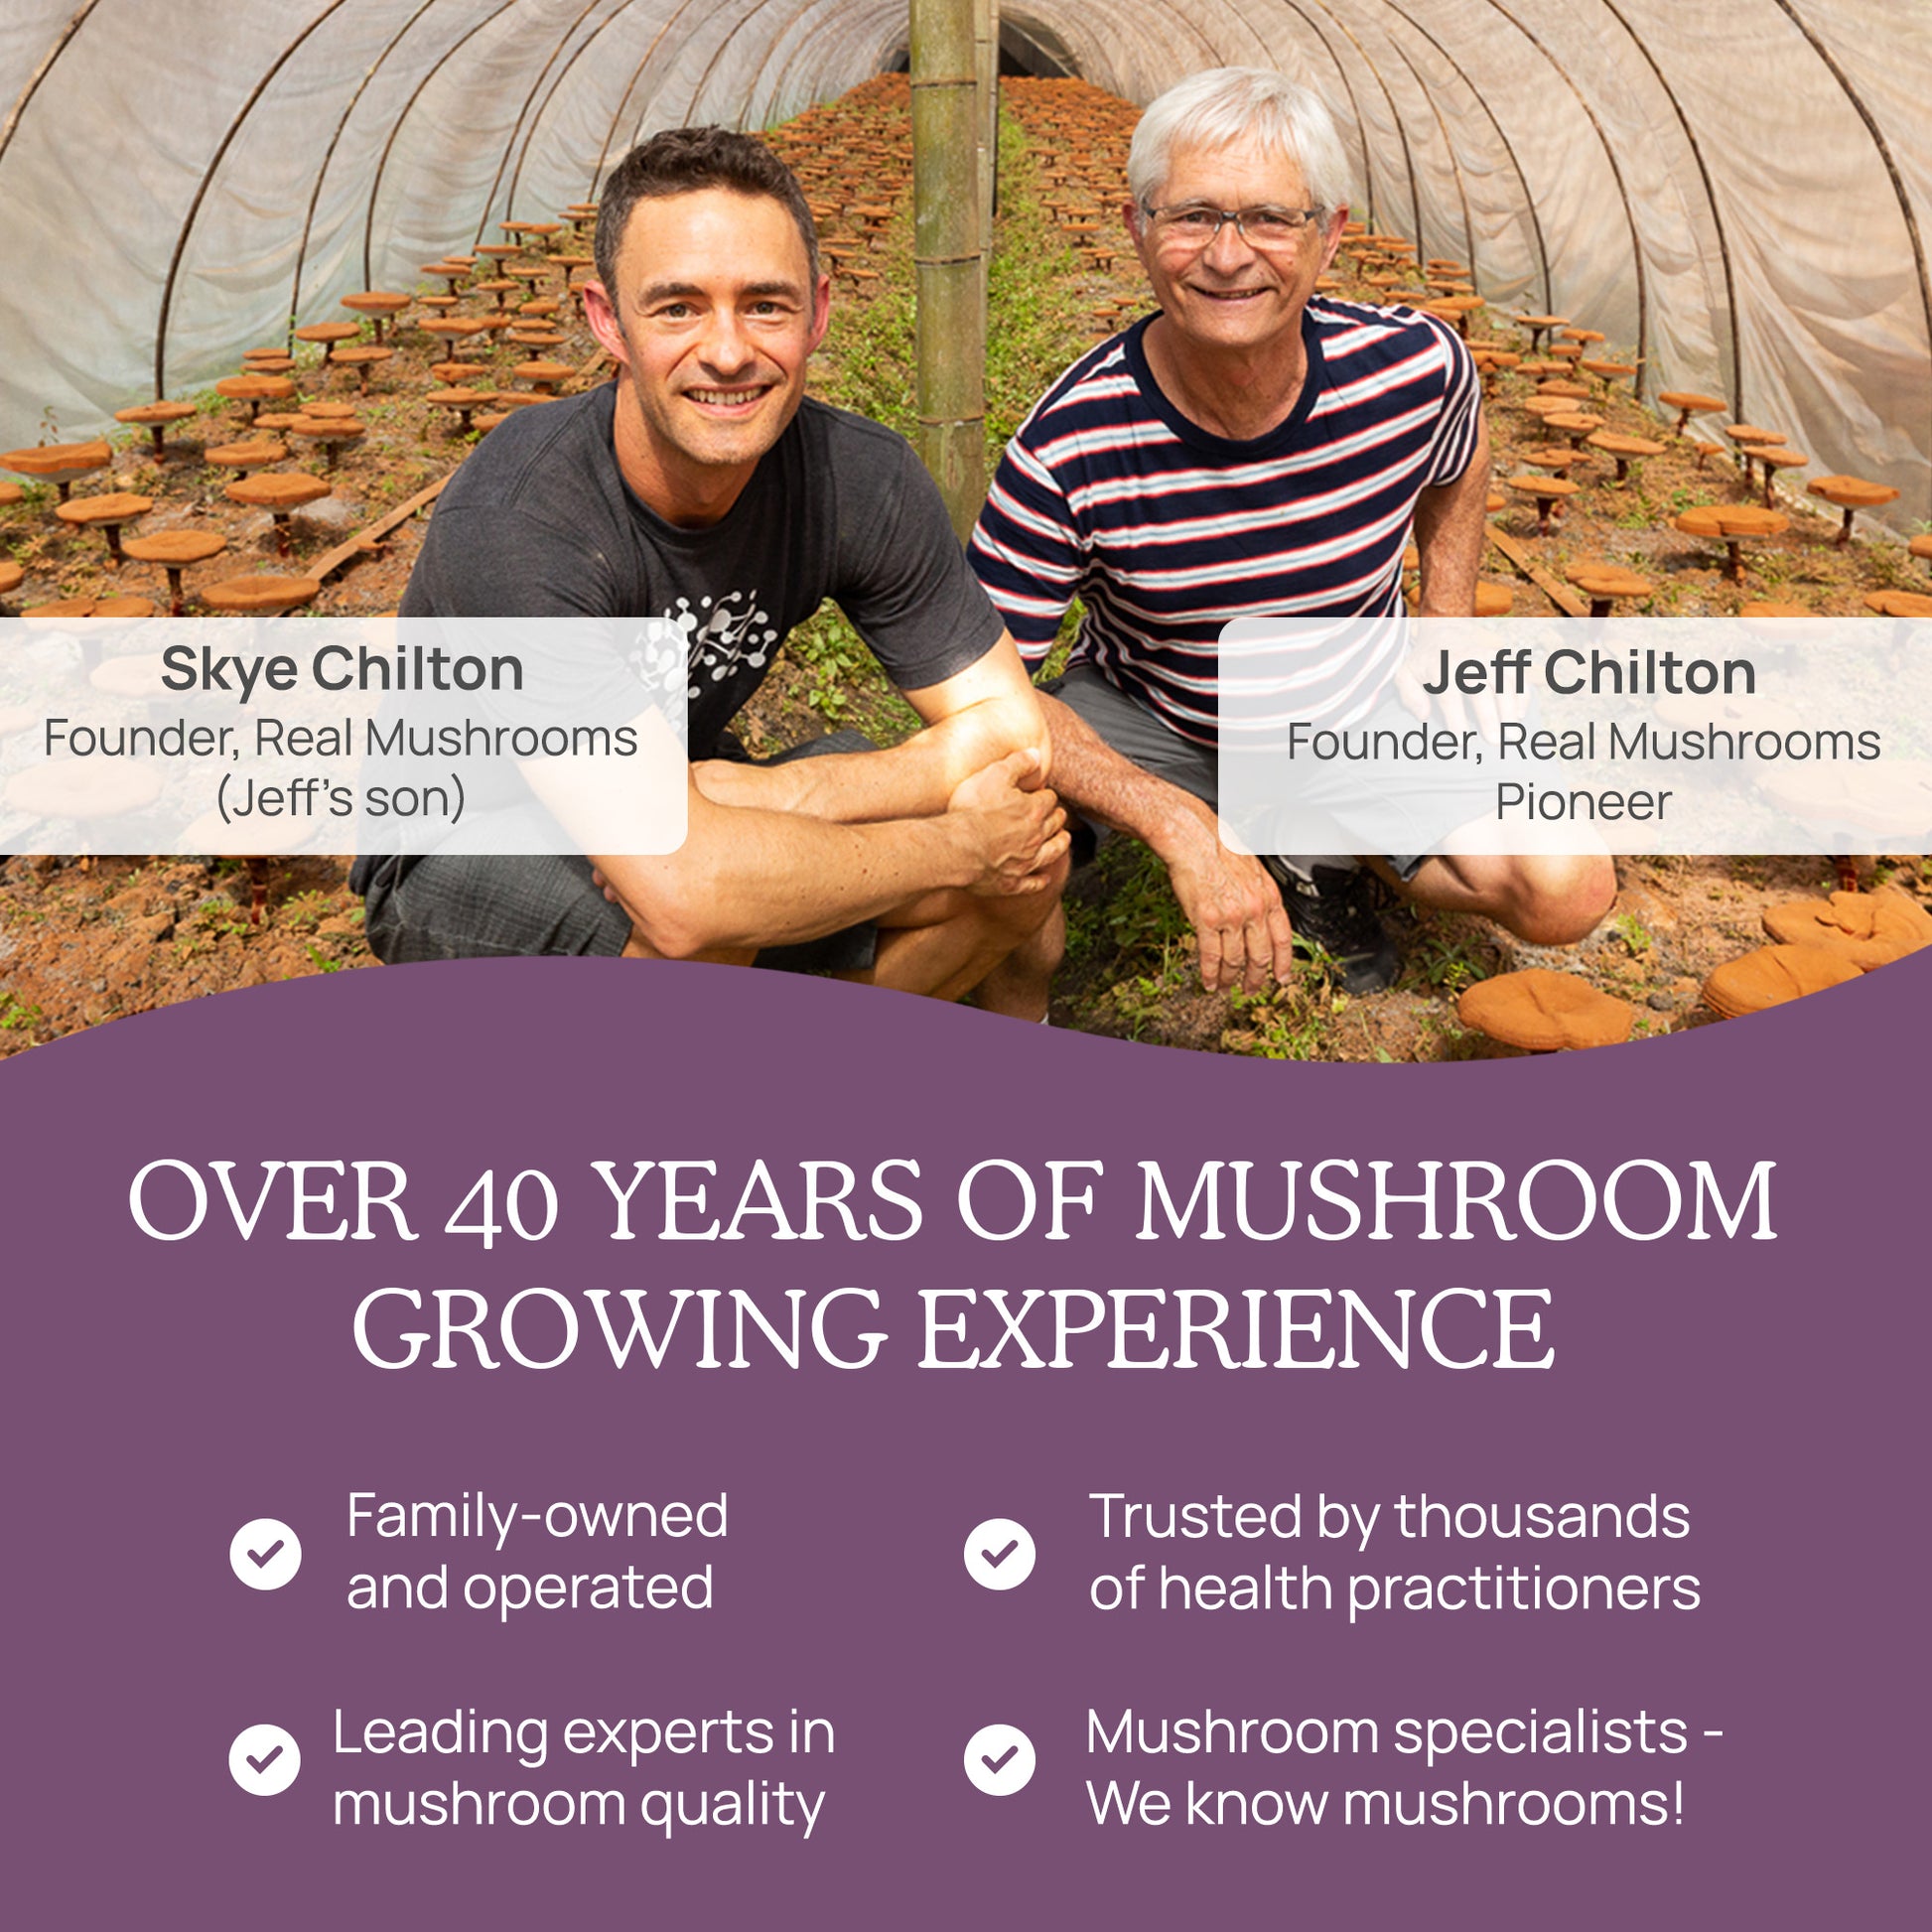 Two men smiling inside an organic mushroom cultivation greenhouse, representing over 40 years of experience in mushroom farming and expertise in Real Mushrooms quality.